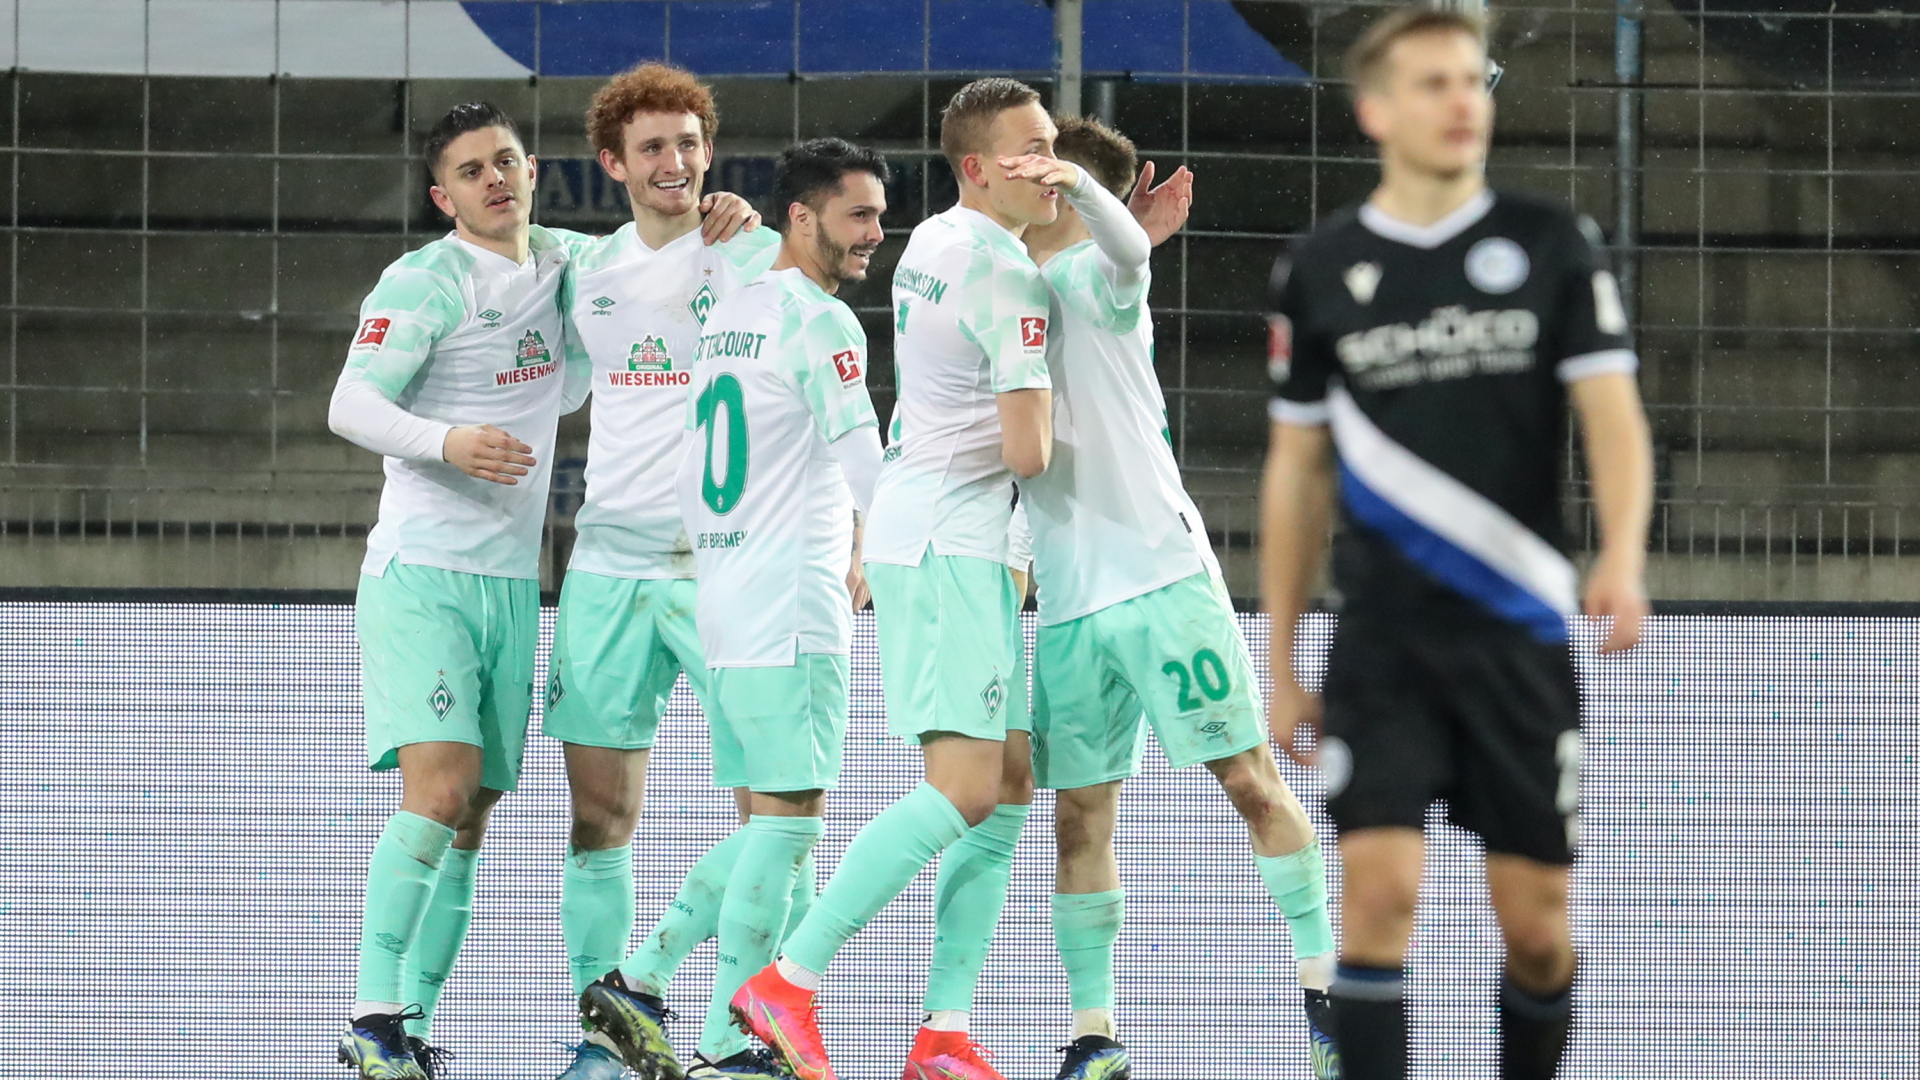 SV Werder Bremen players are happy after the goal to make it 1-0 against Bielefeld. | dpa